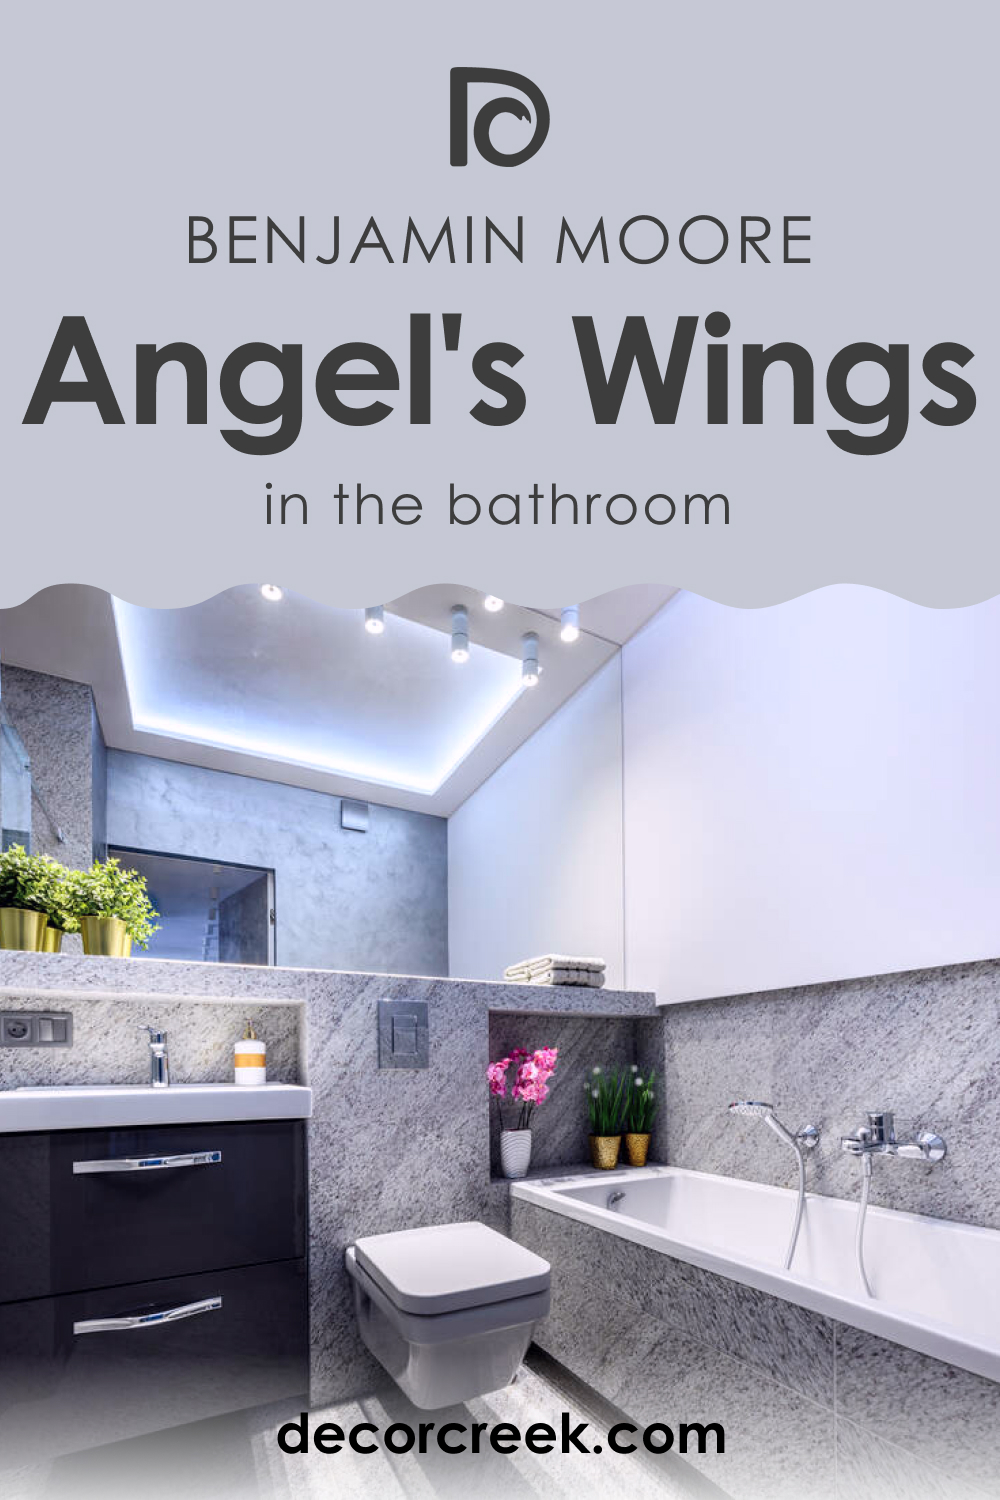 How to Use Angel's Wings 1423 in the Bathroom?